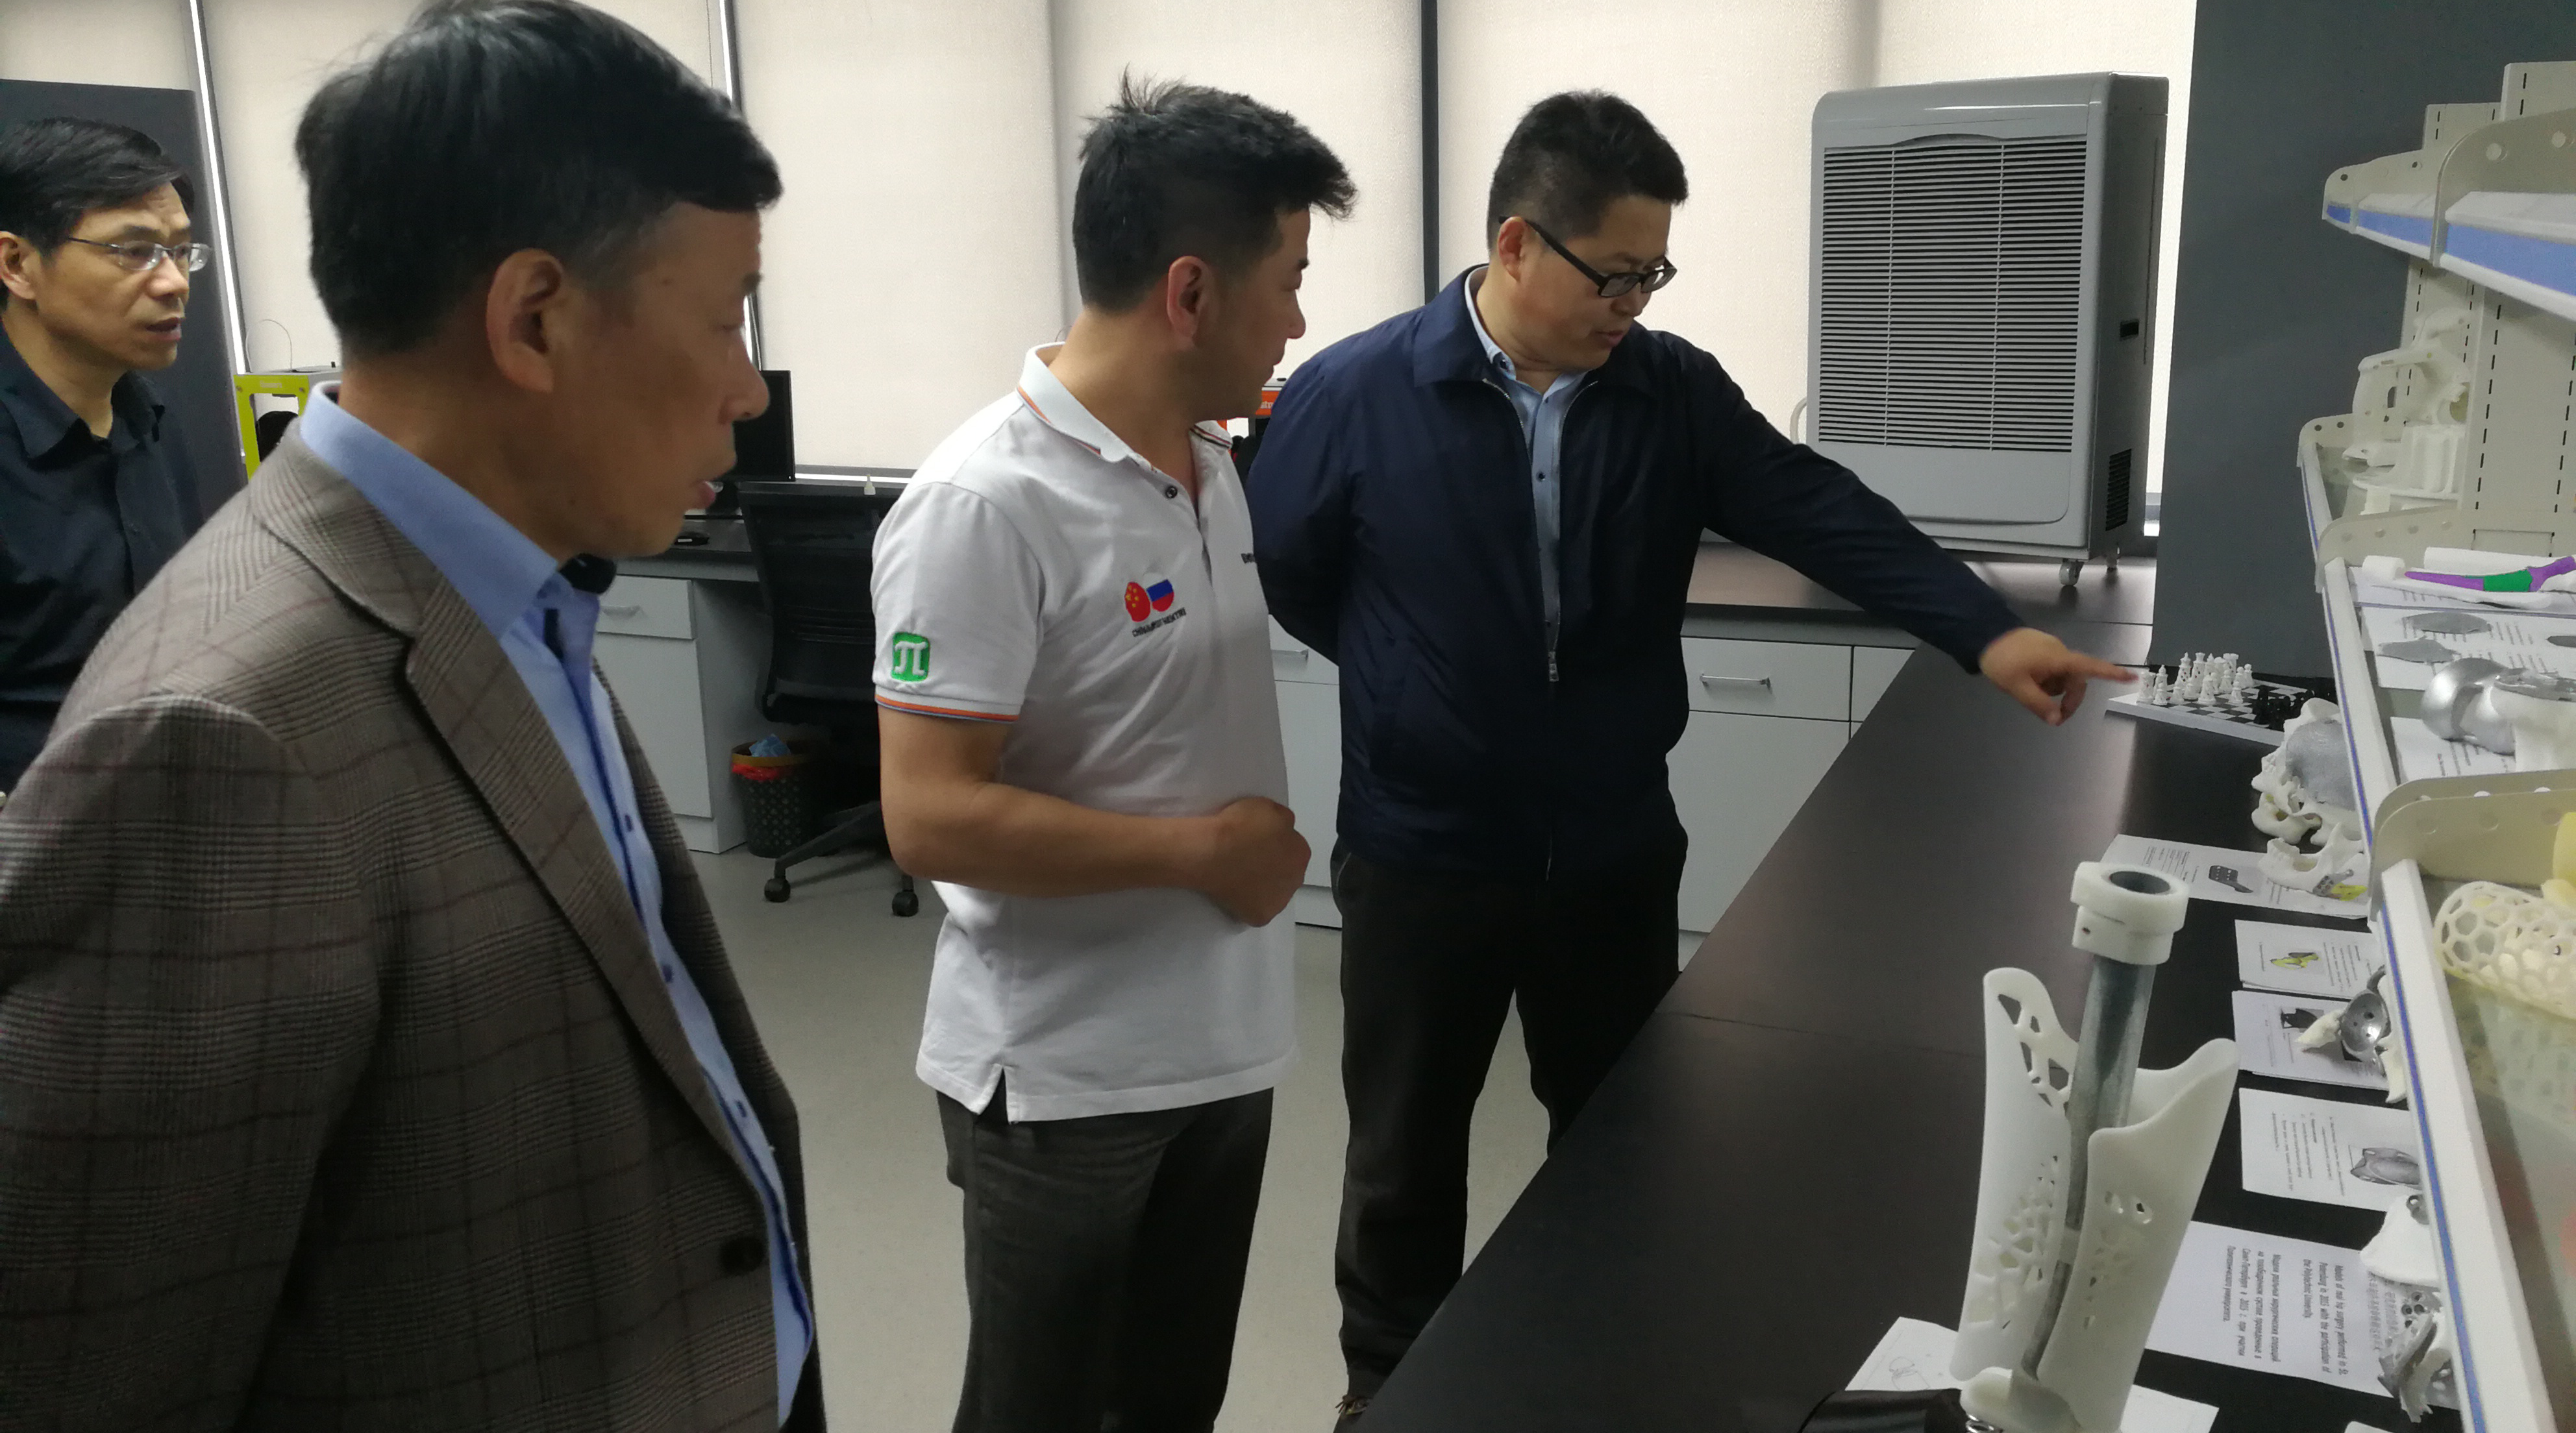 The Director of the Rural Center of the Ministry of Science and Technology, and the Dean of the Chinese Academy of Management, Liu Dean visited our hospital.